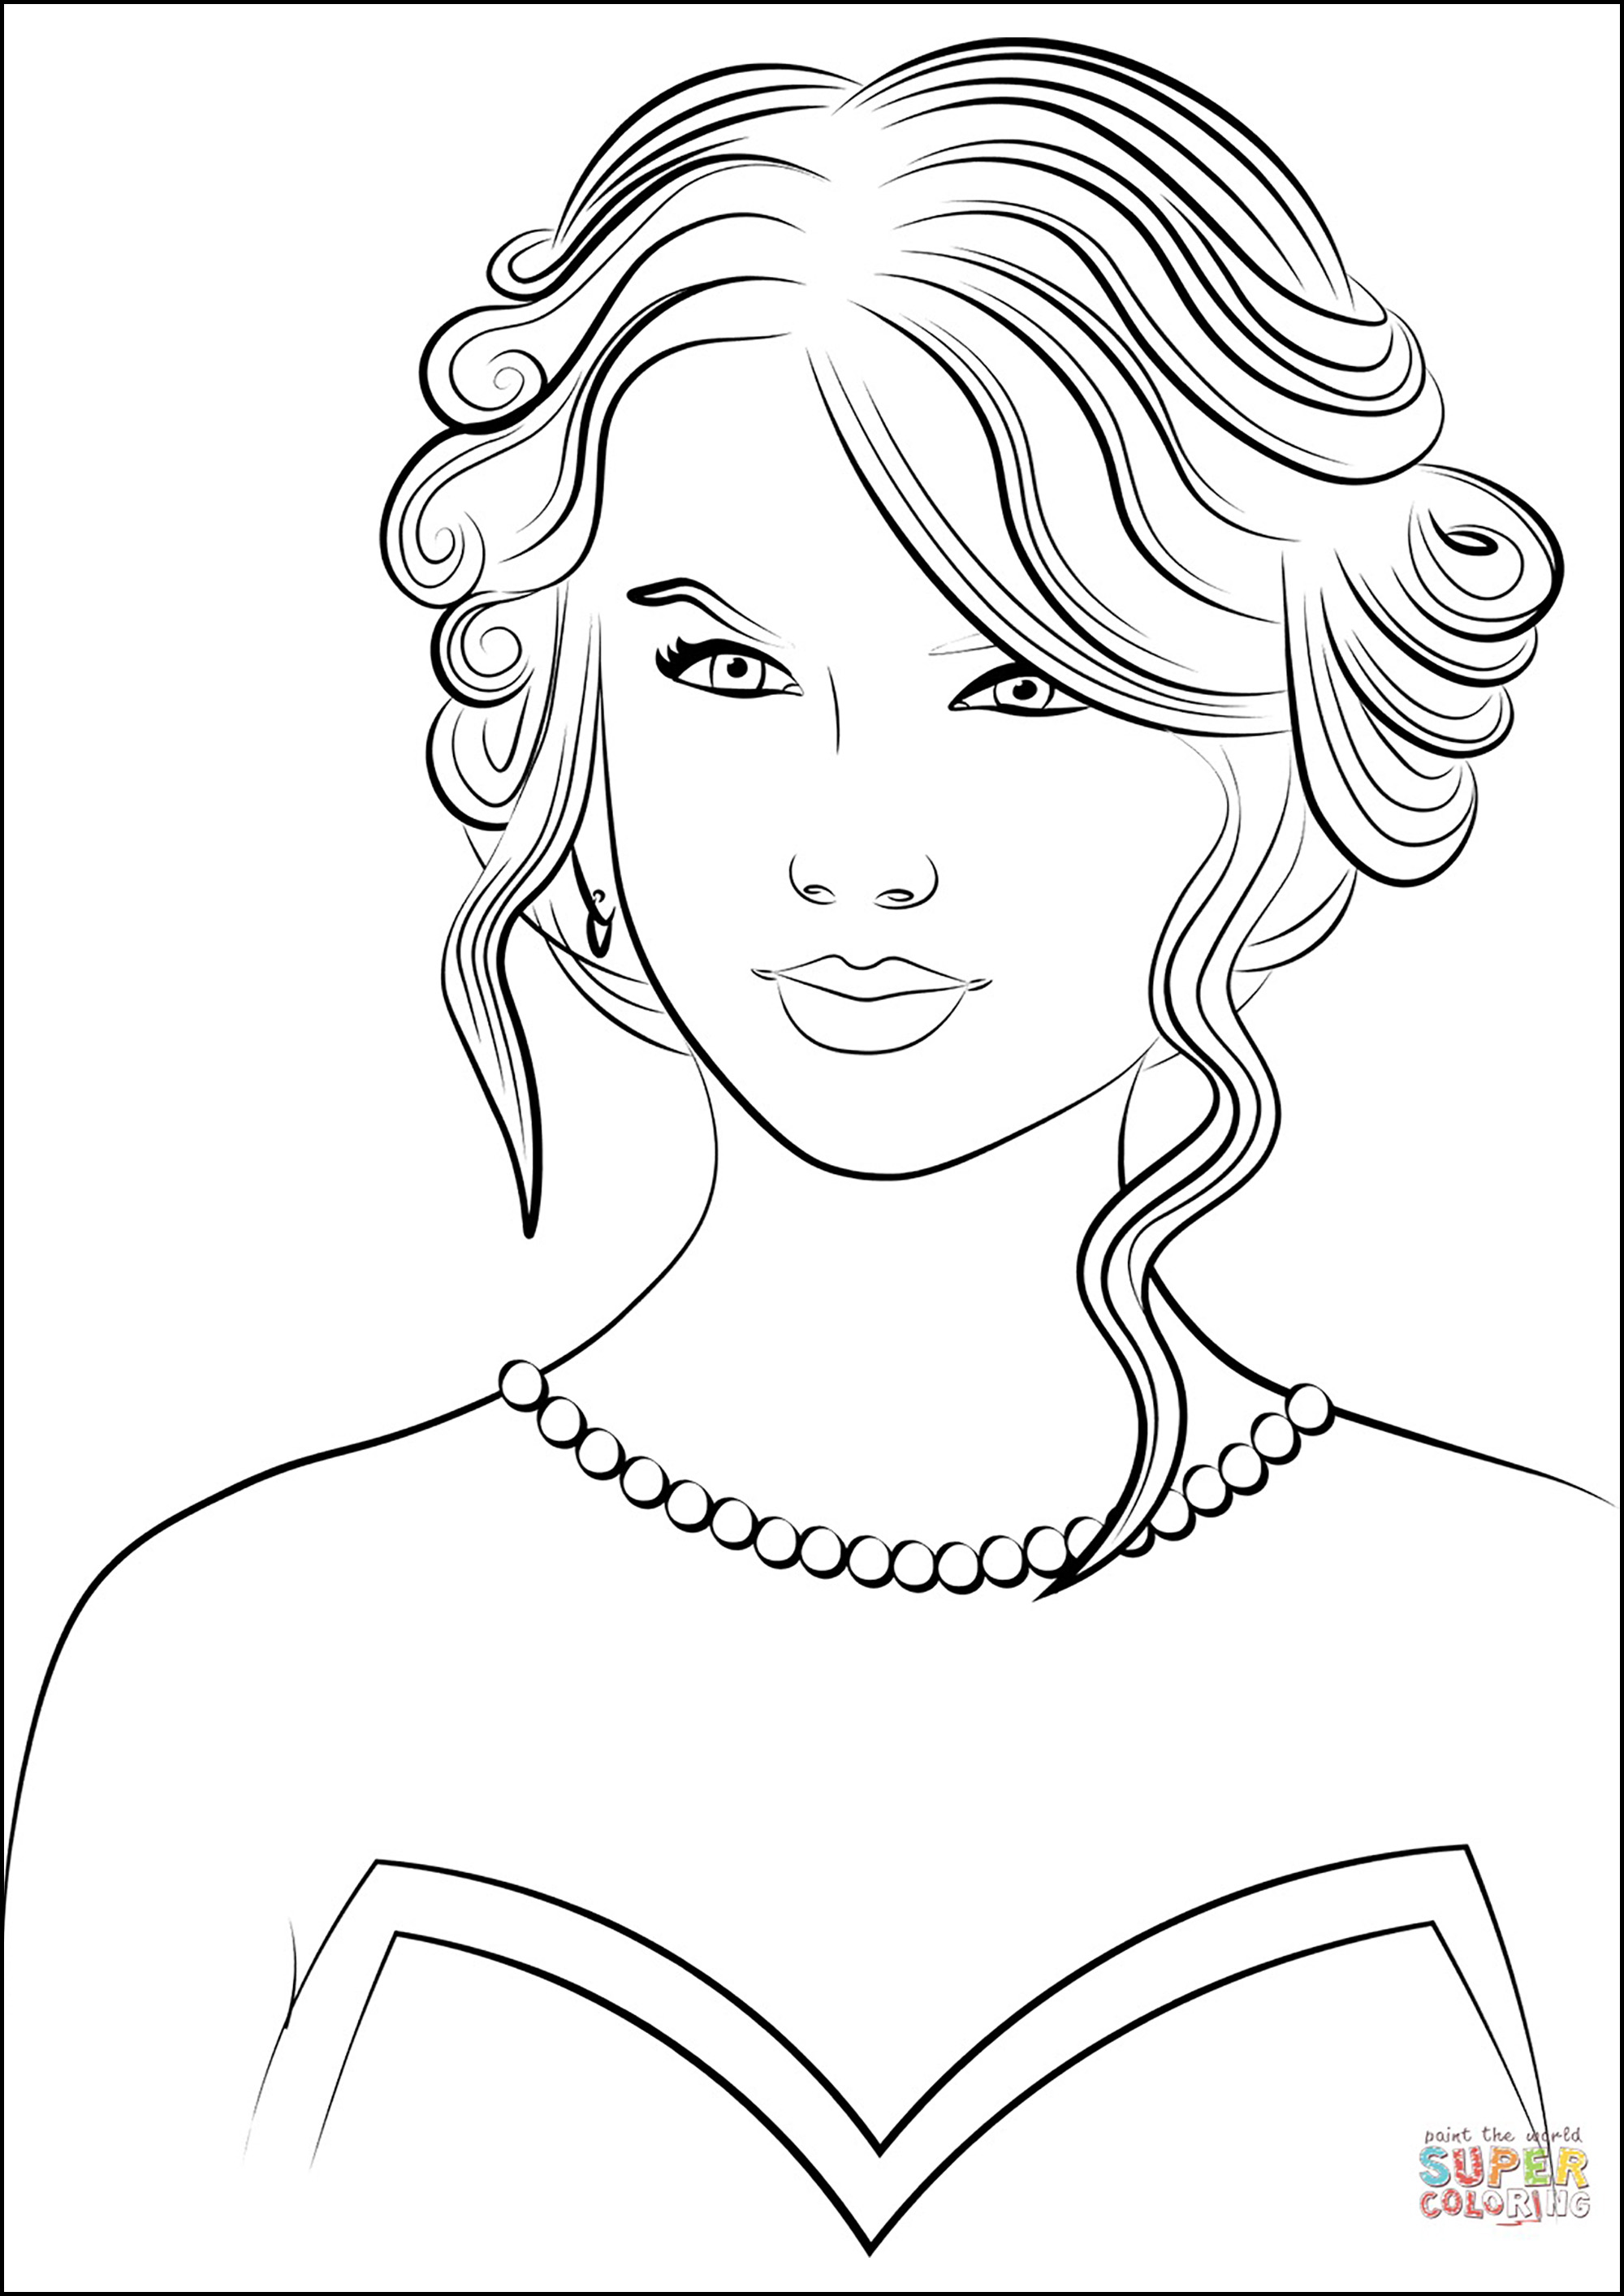 Taylor Swift coloring book